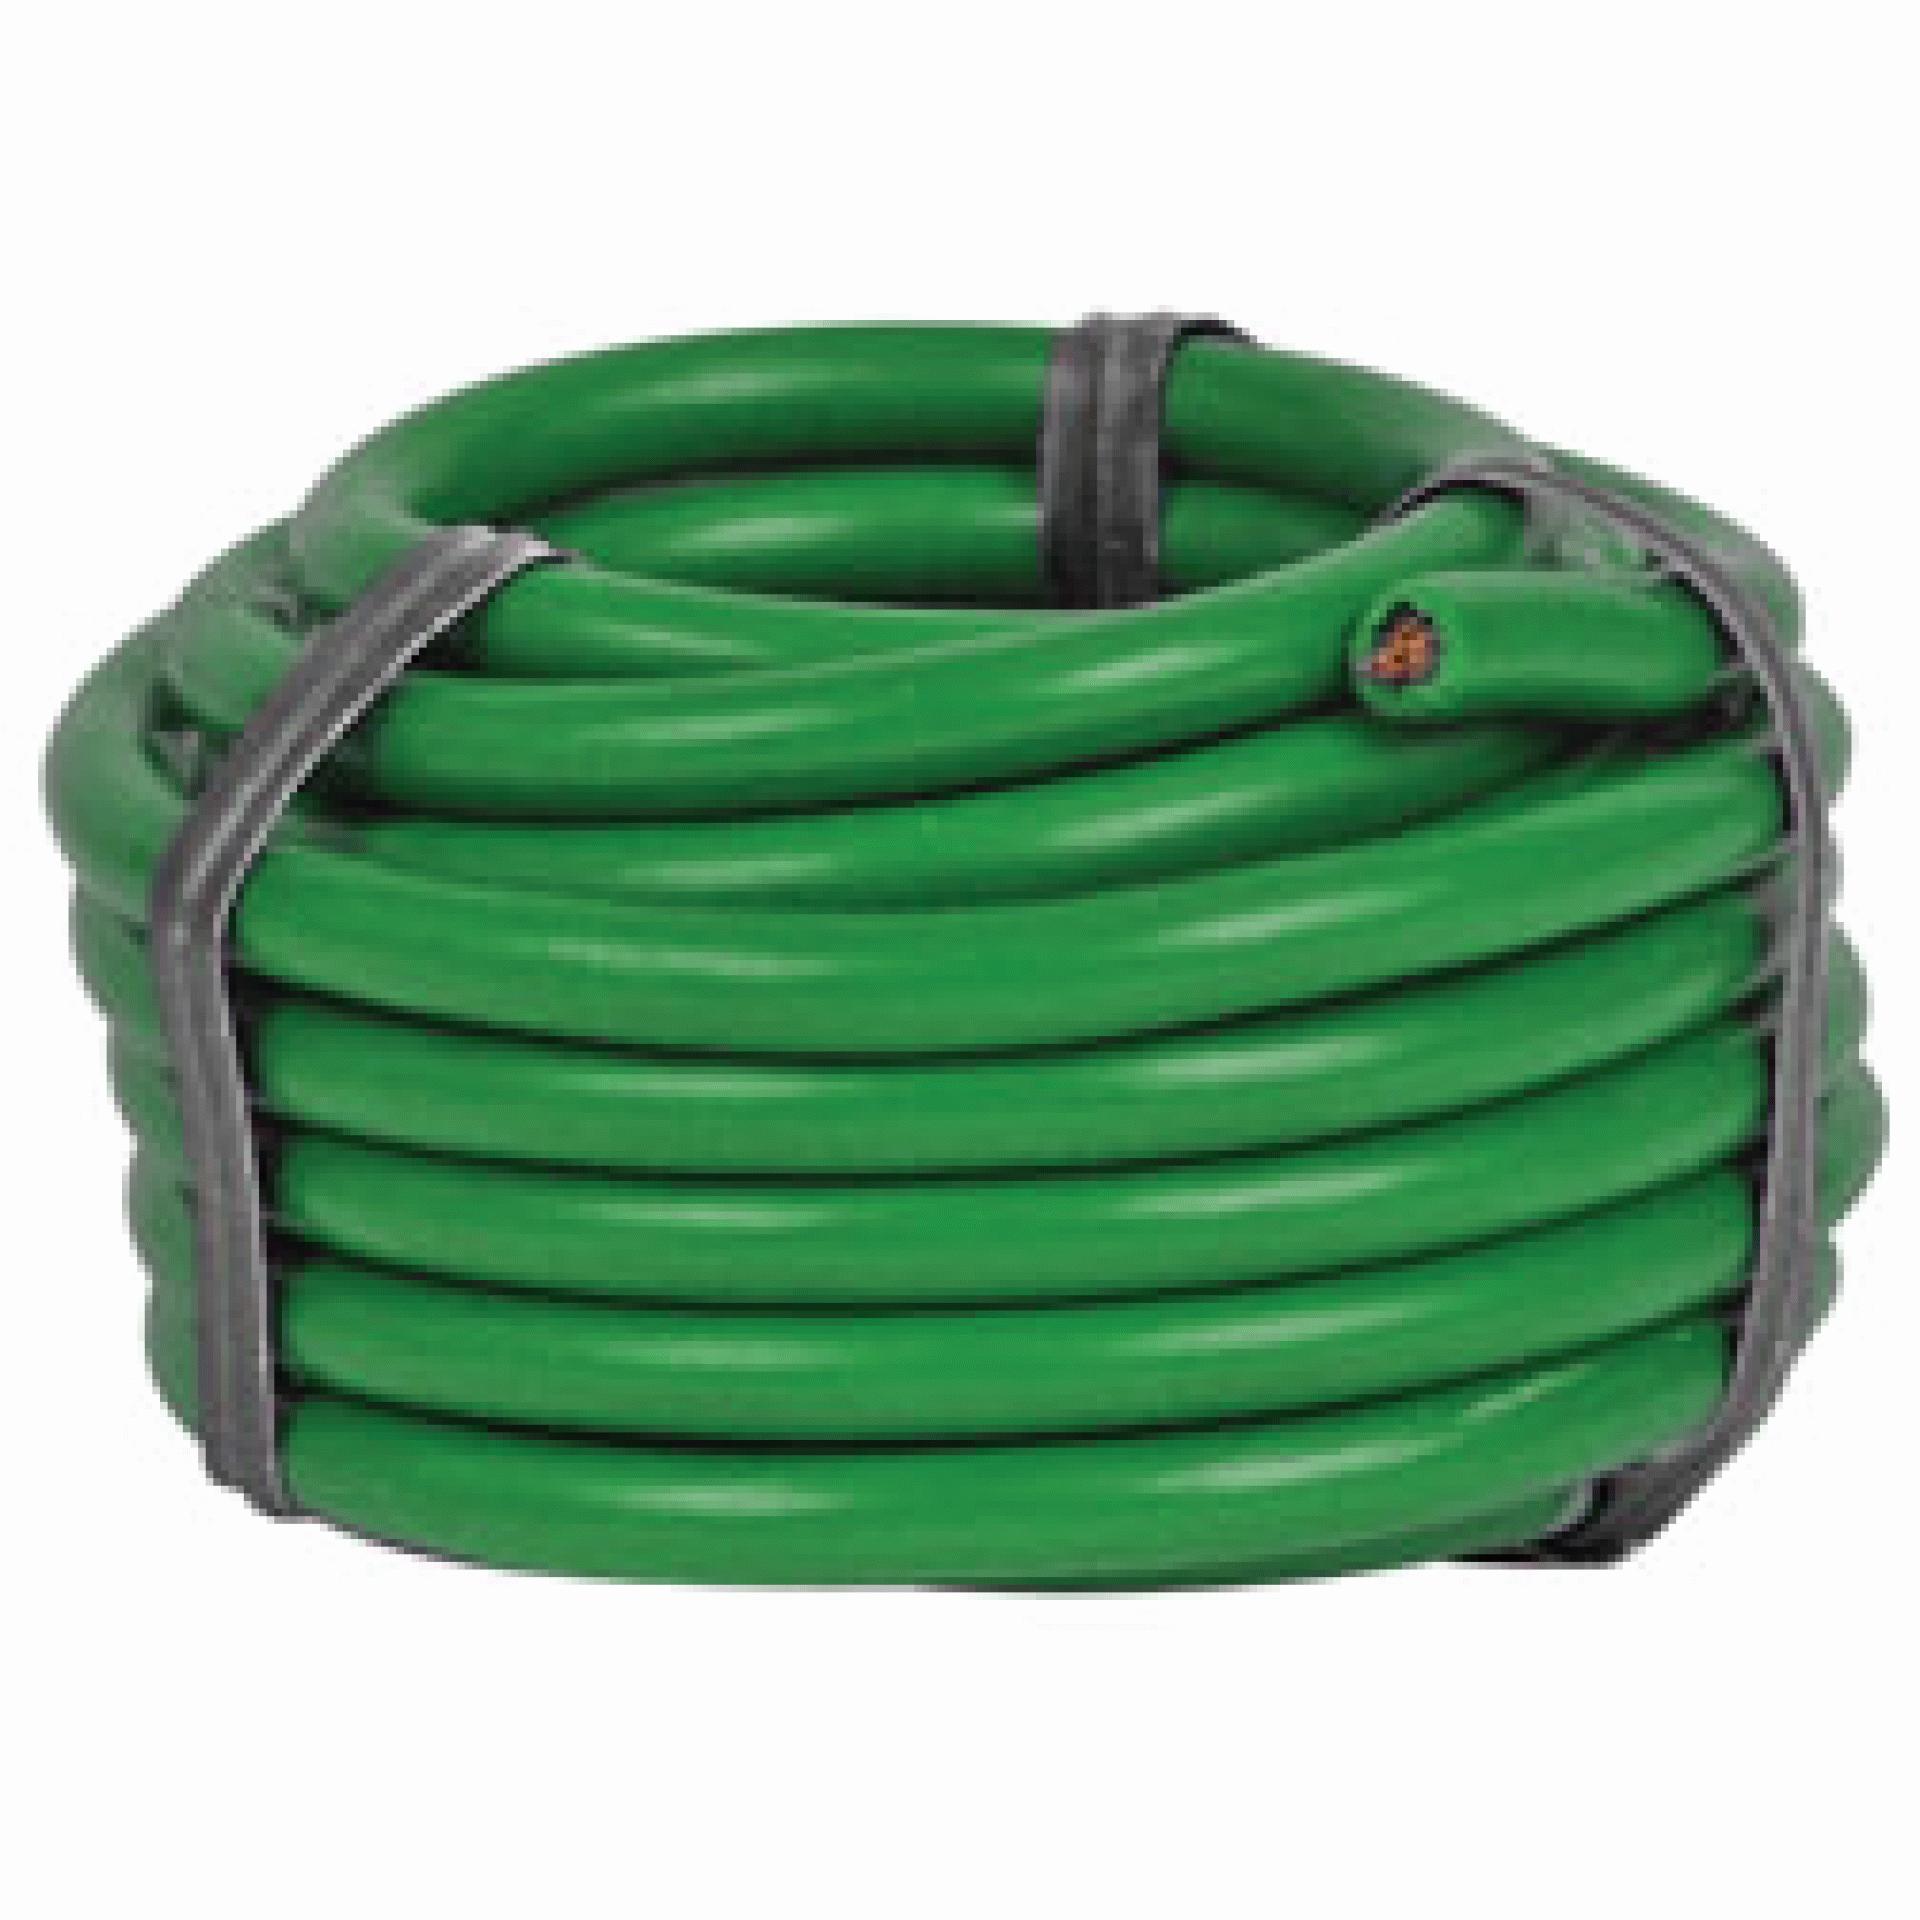 CAMCO MFG INC | 64208 | WIRE PRIMARY 14 GAUGE 20' - GREEN